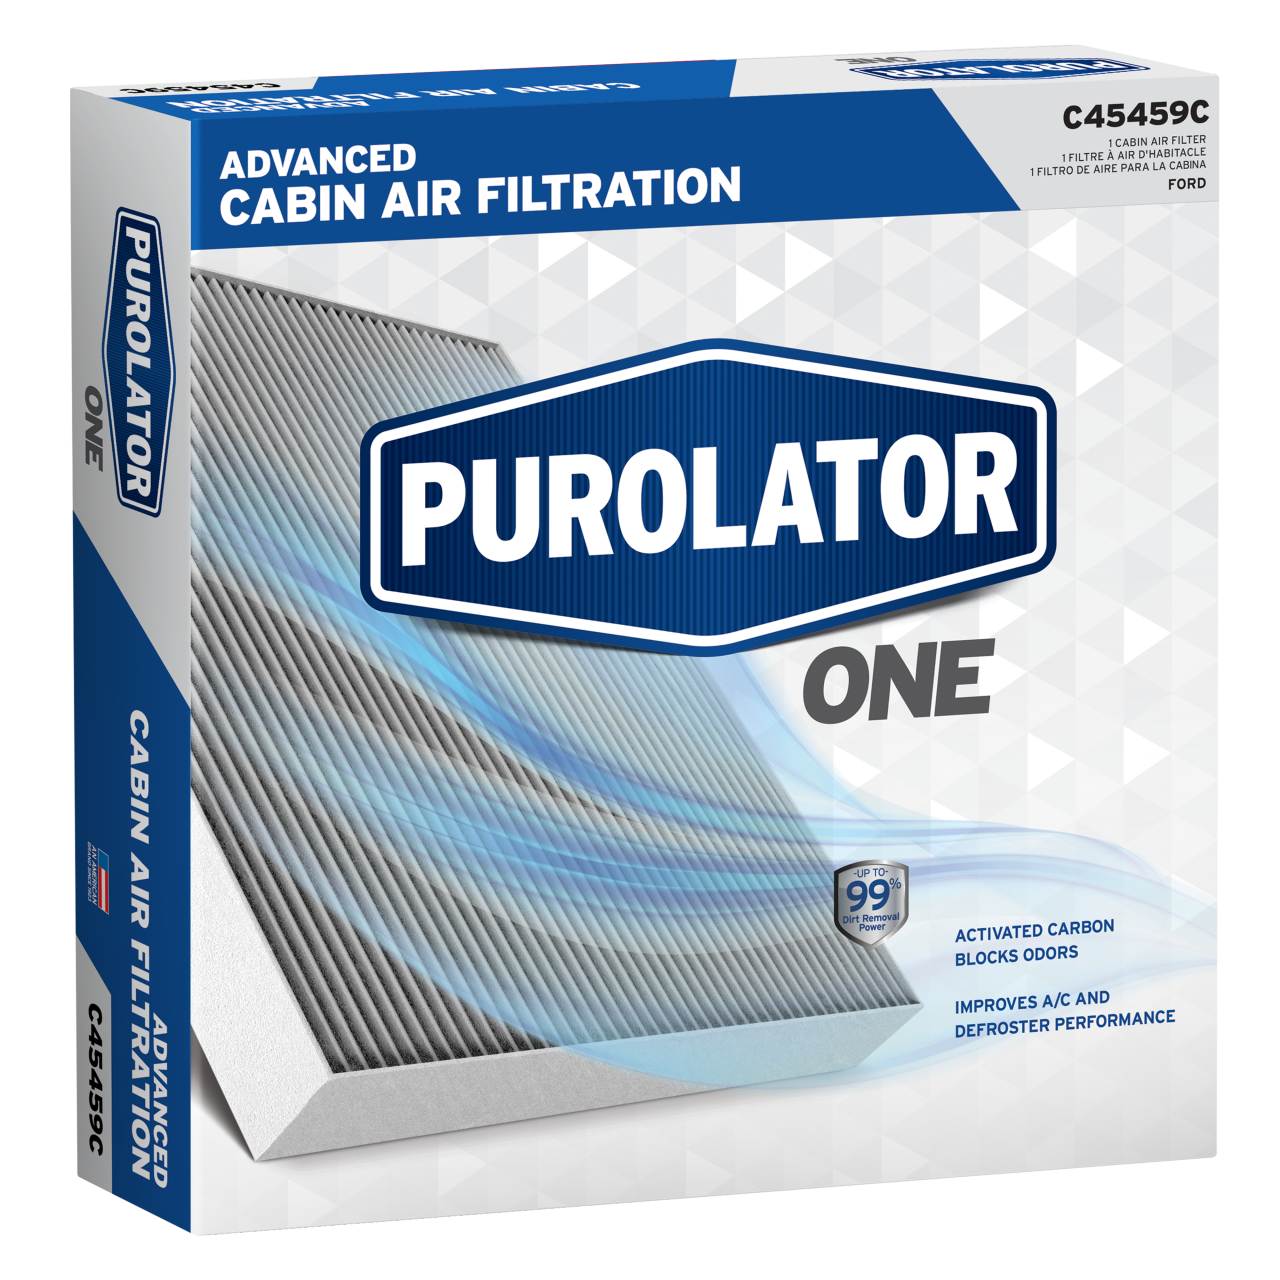 PurolatorONE™ Cabin Air Filters improve overall driving comfort and encourage better airflow through your vehicle and aids in defroster performance.